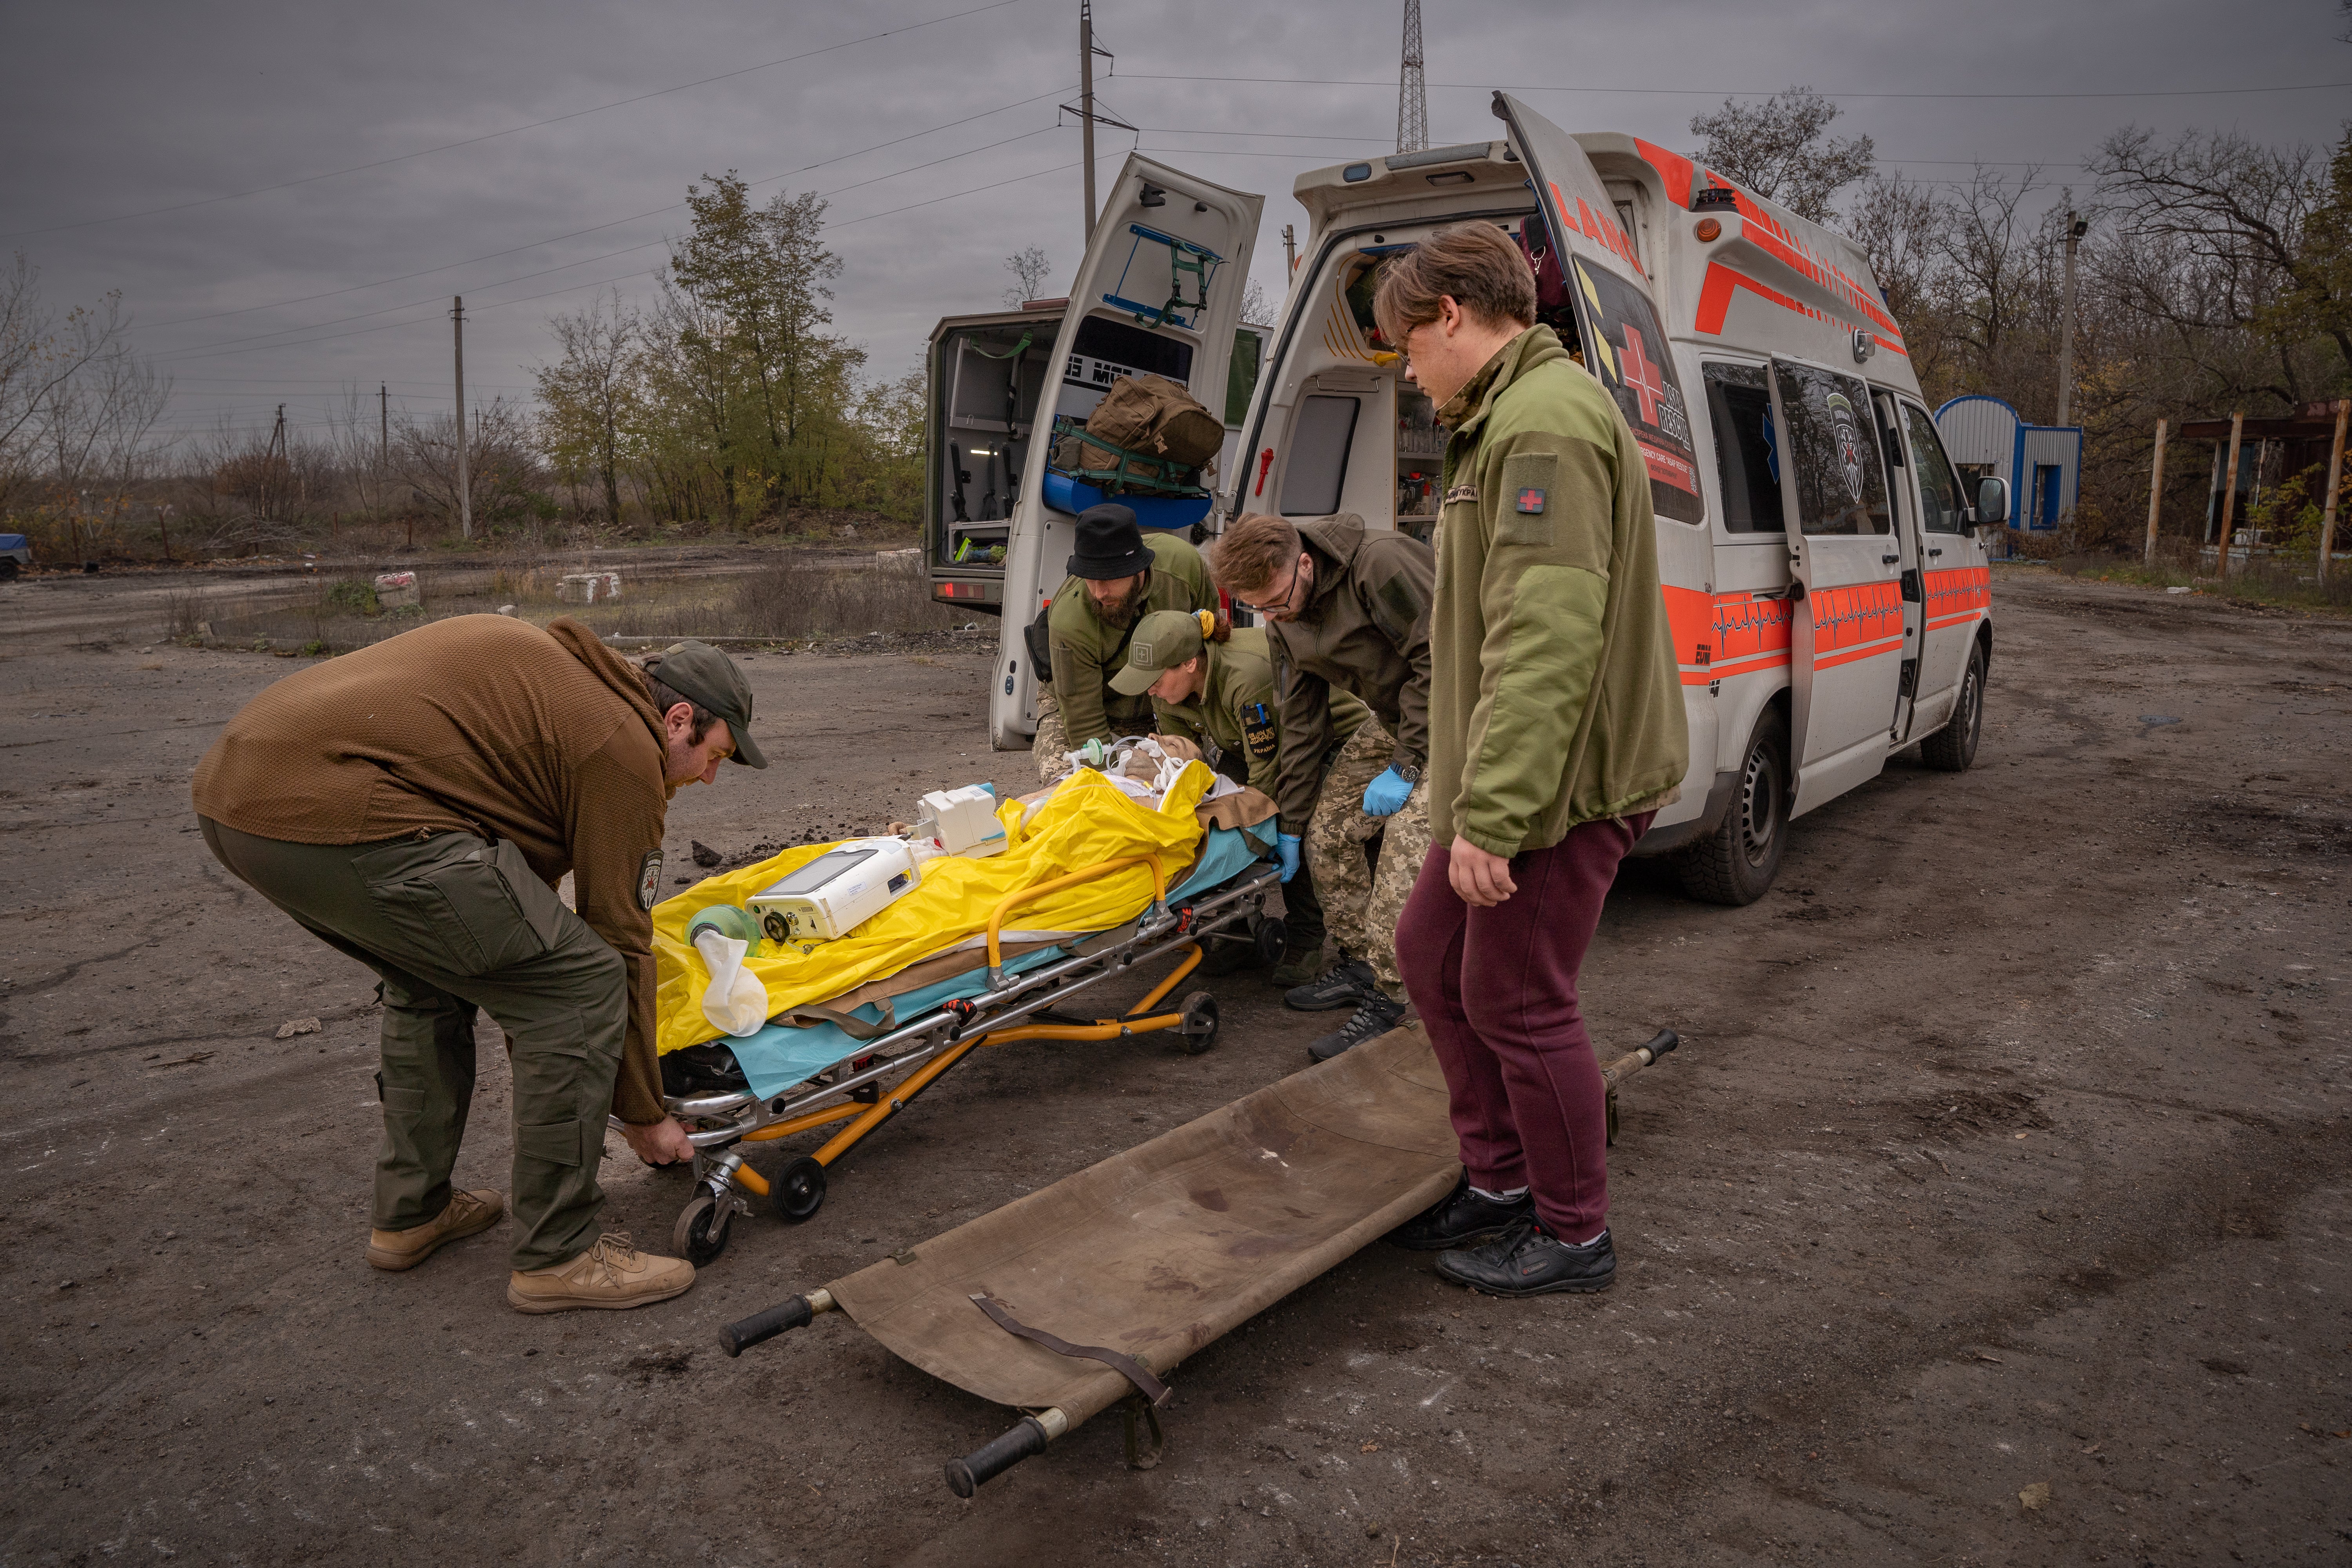 A critically injured patient is transferred by Kroha’s team near the frontline in Donbas